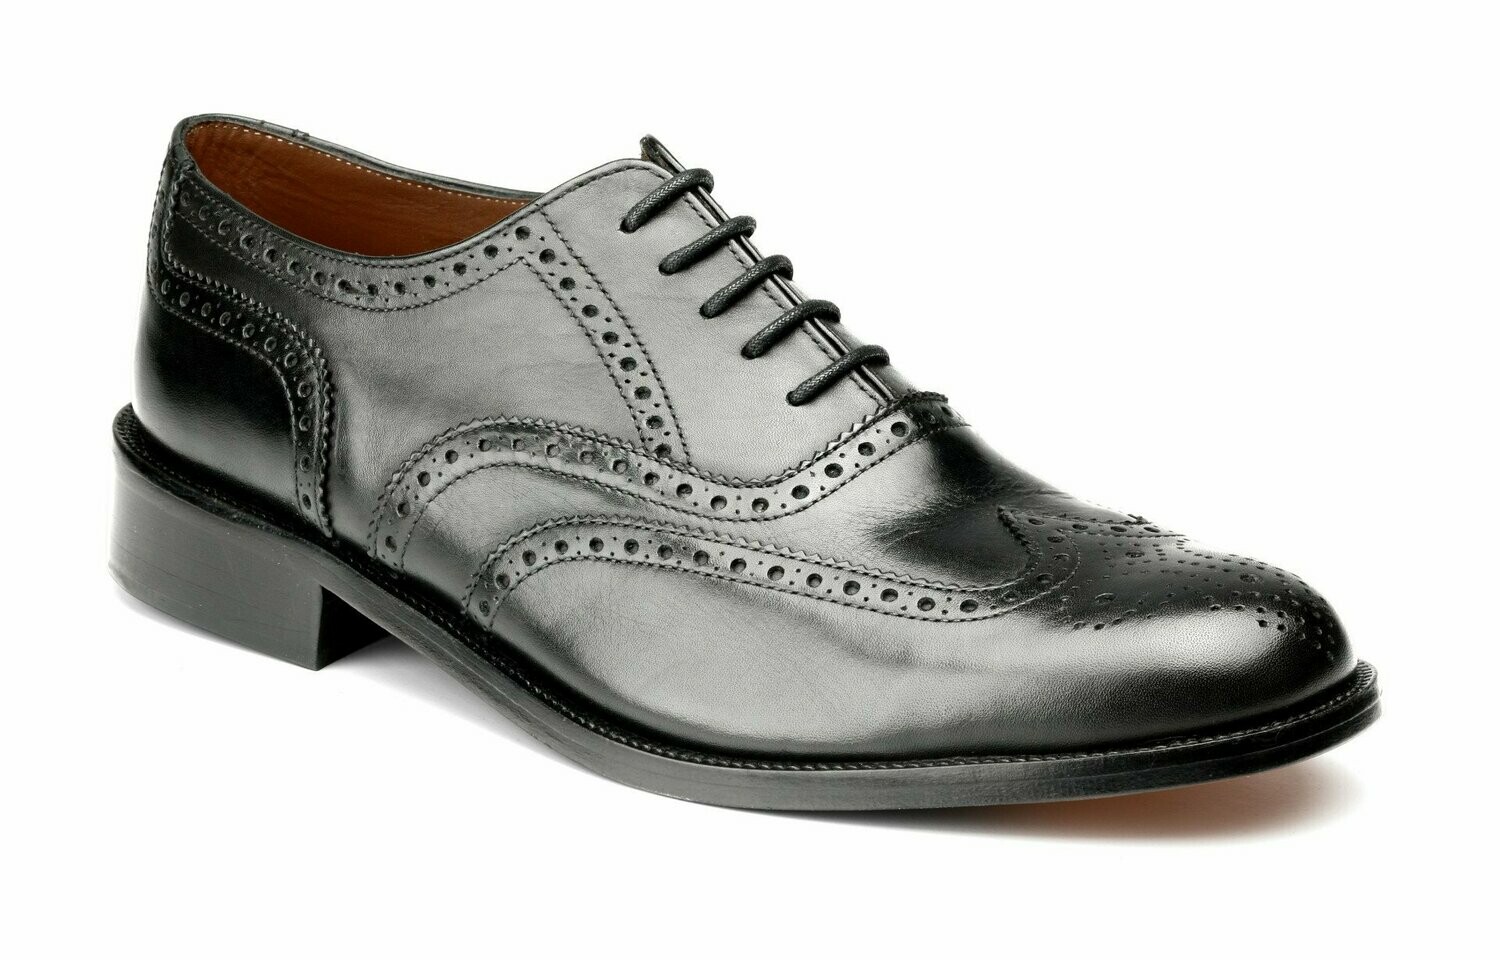 Day Brogues, Black Leather, Shoe Size: 6, Fitting: Standard Fitting Only